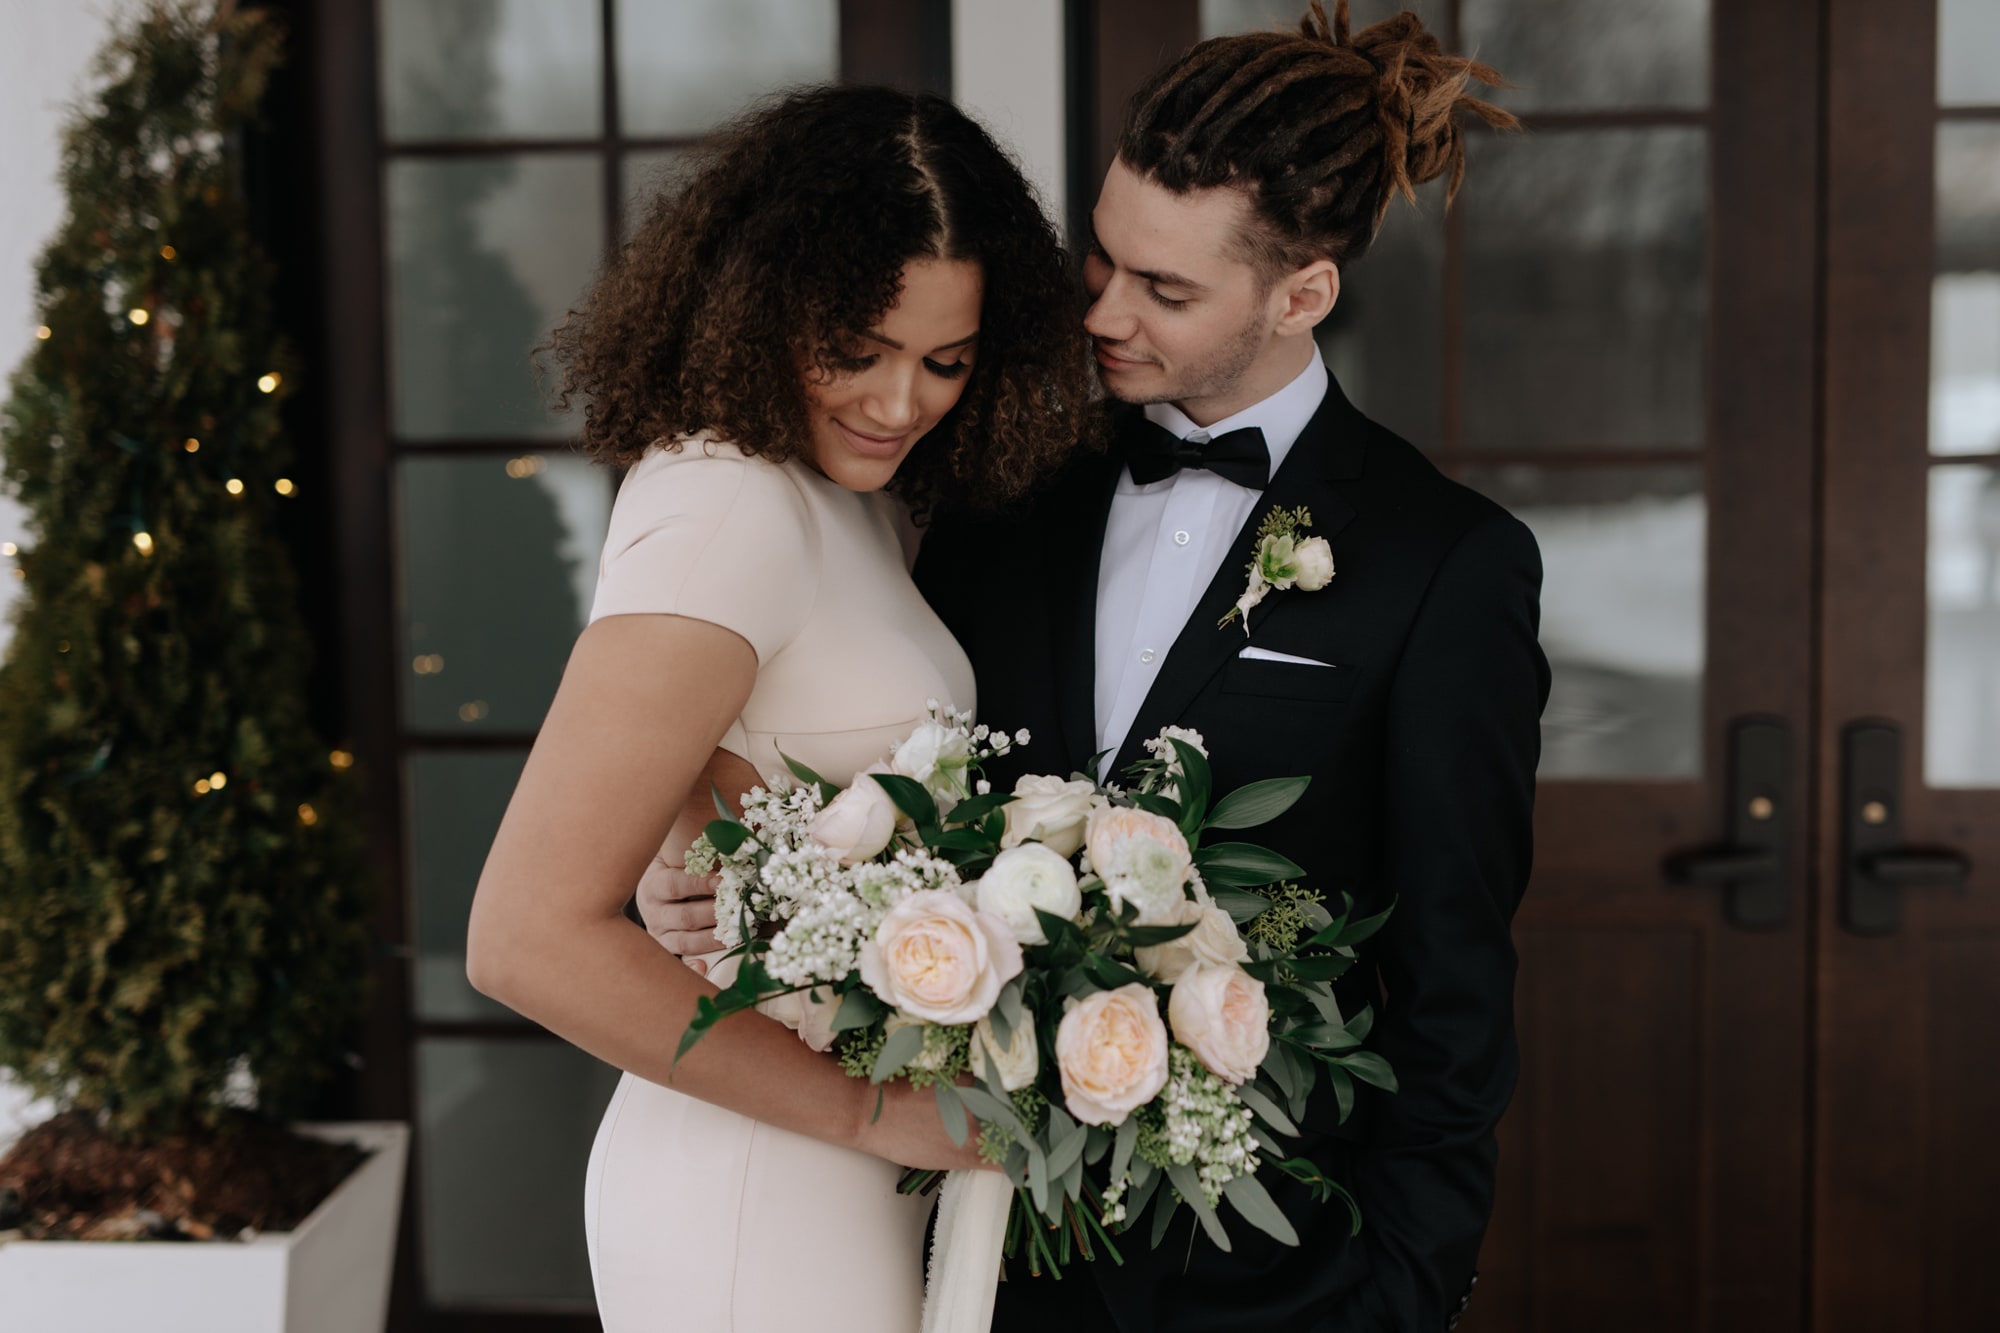 A beautiful bride smiles, embraced by her groom while holding a large bouquet in Minneapolis.